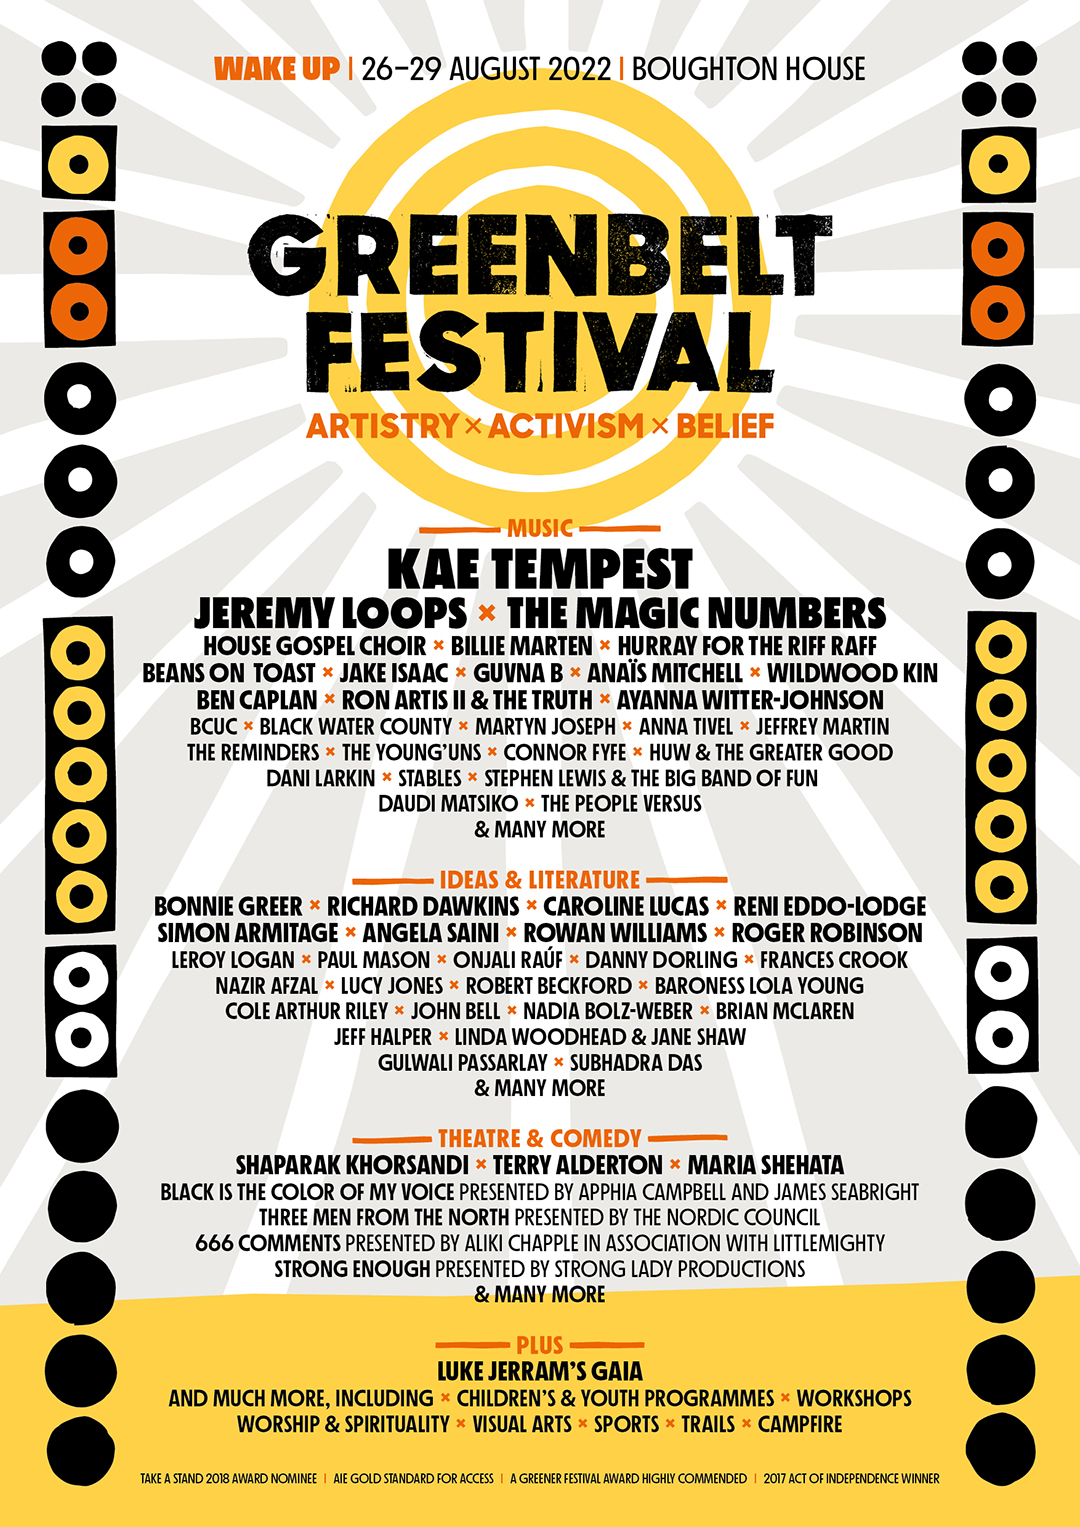 Greenbelt Festival on Twitter "Here it is. Our 2022 lineup. We hope